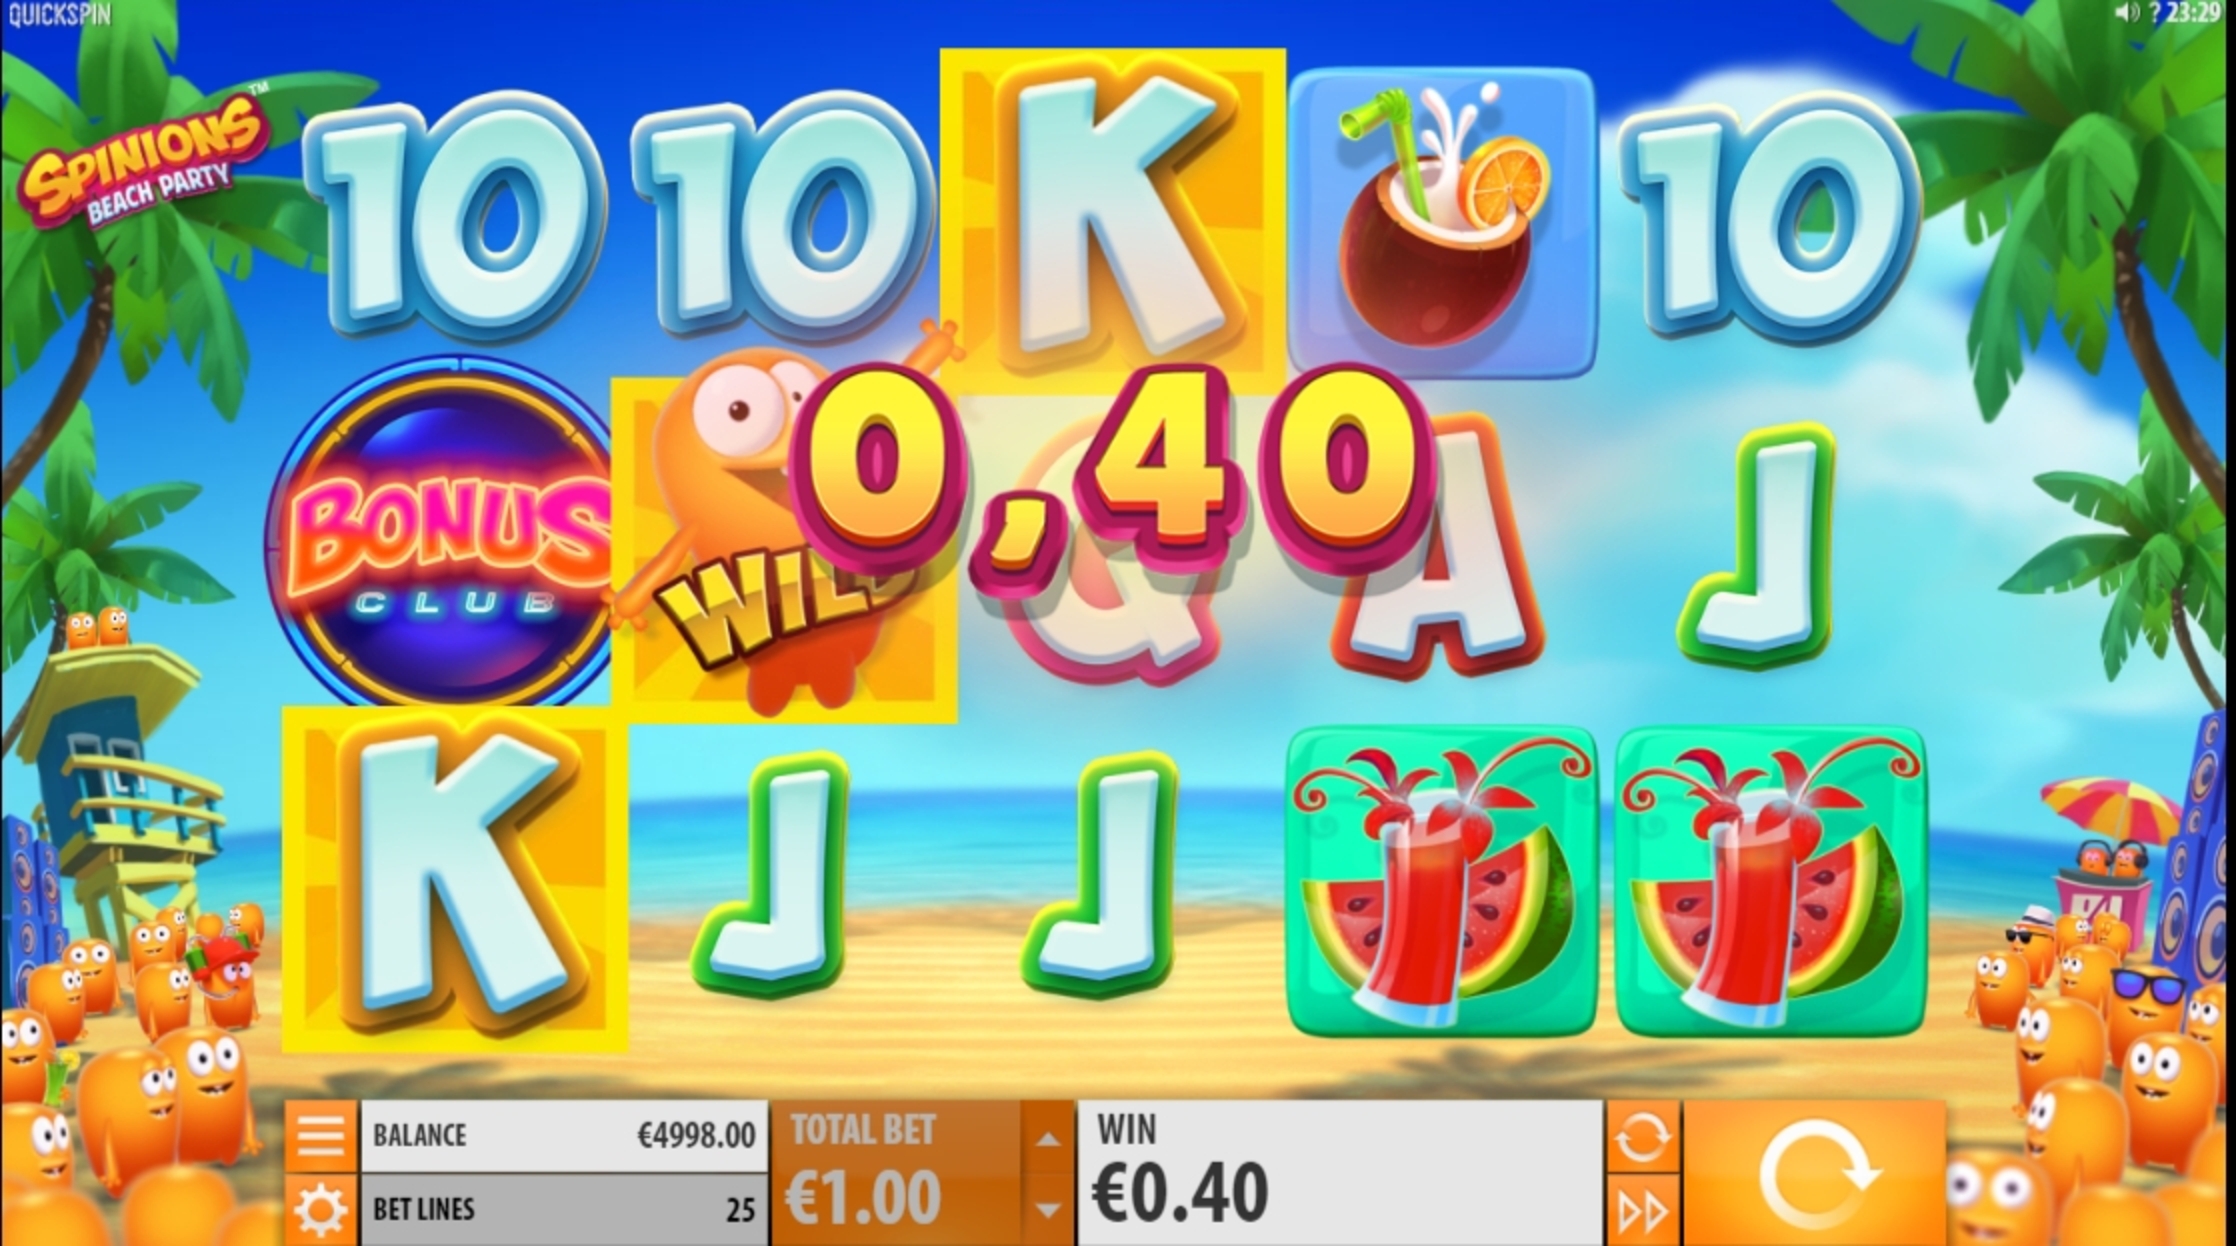 Win Money in Spinions Free Slot Game by Quickspin